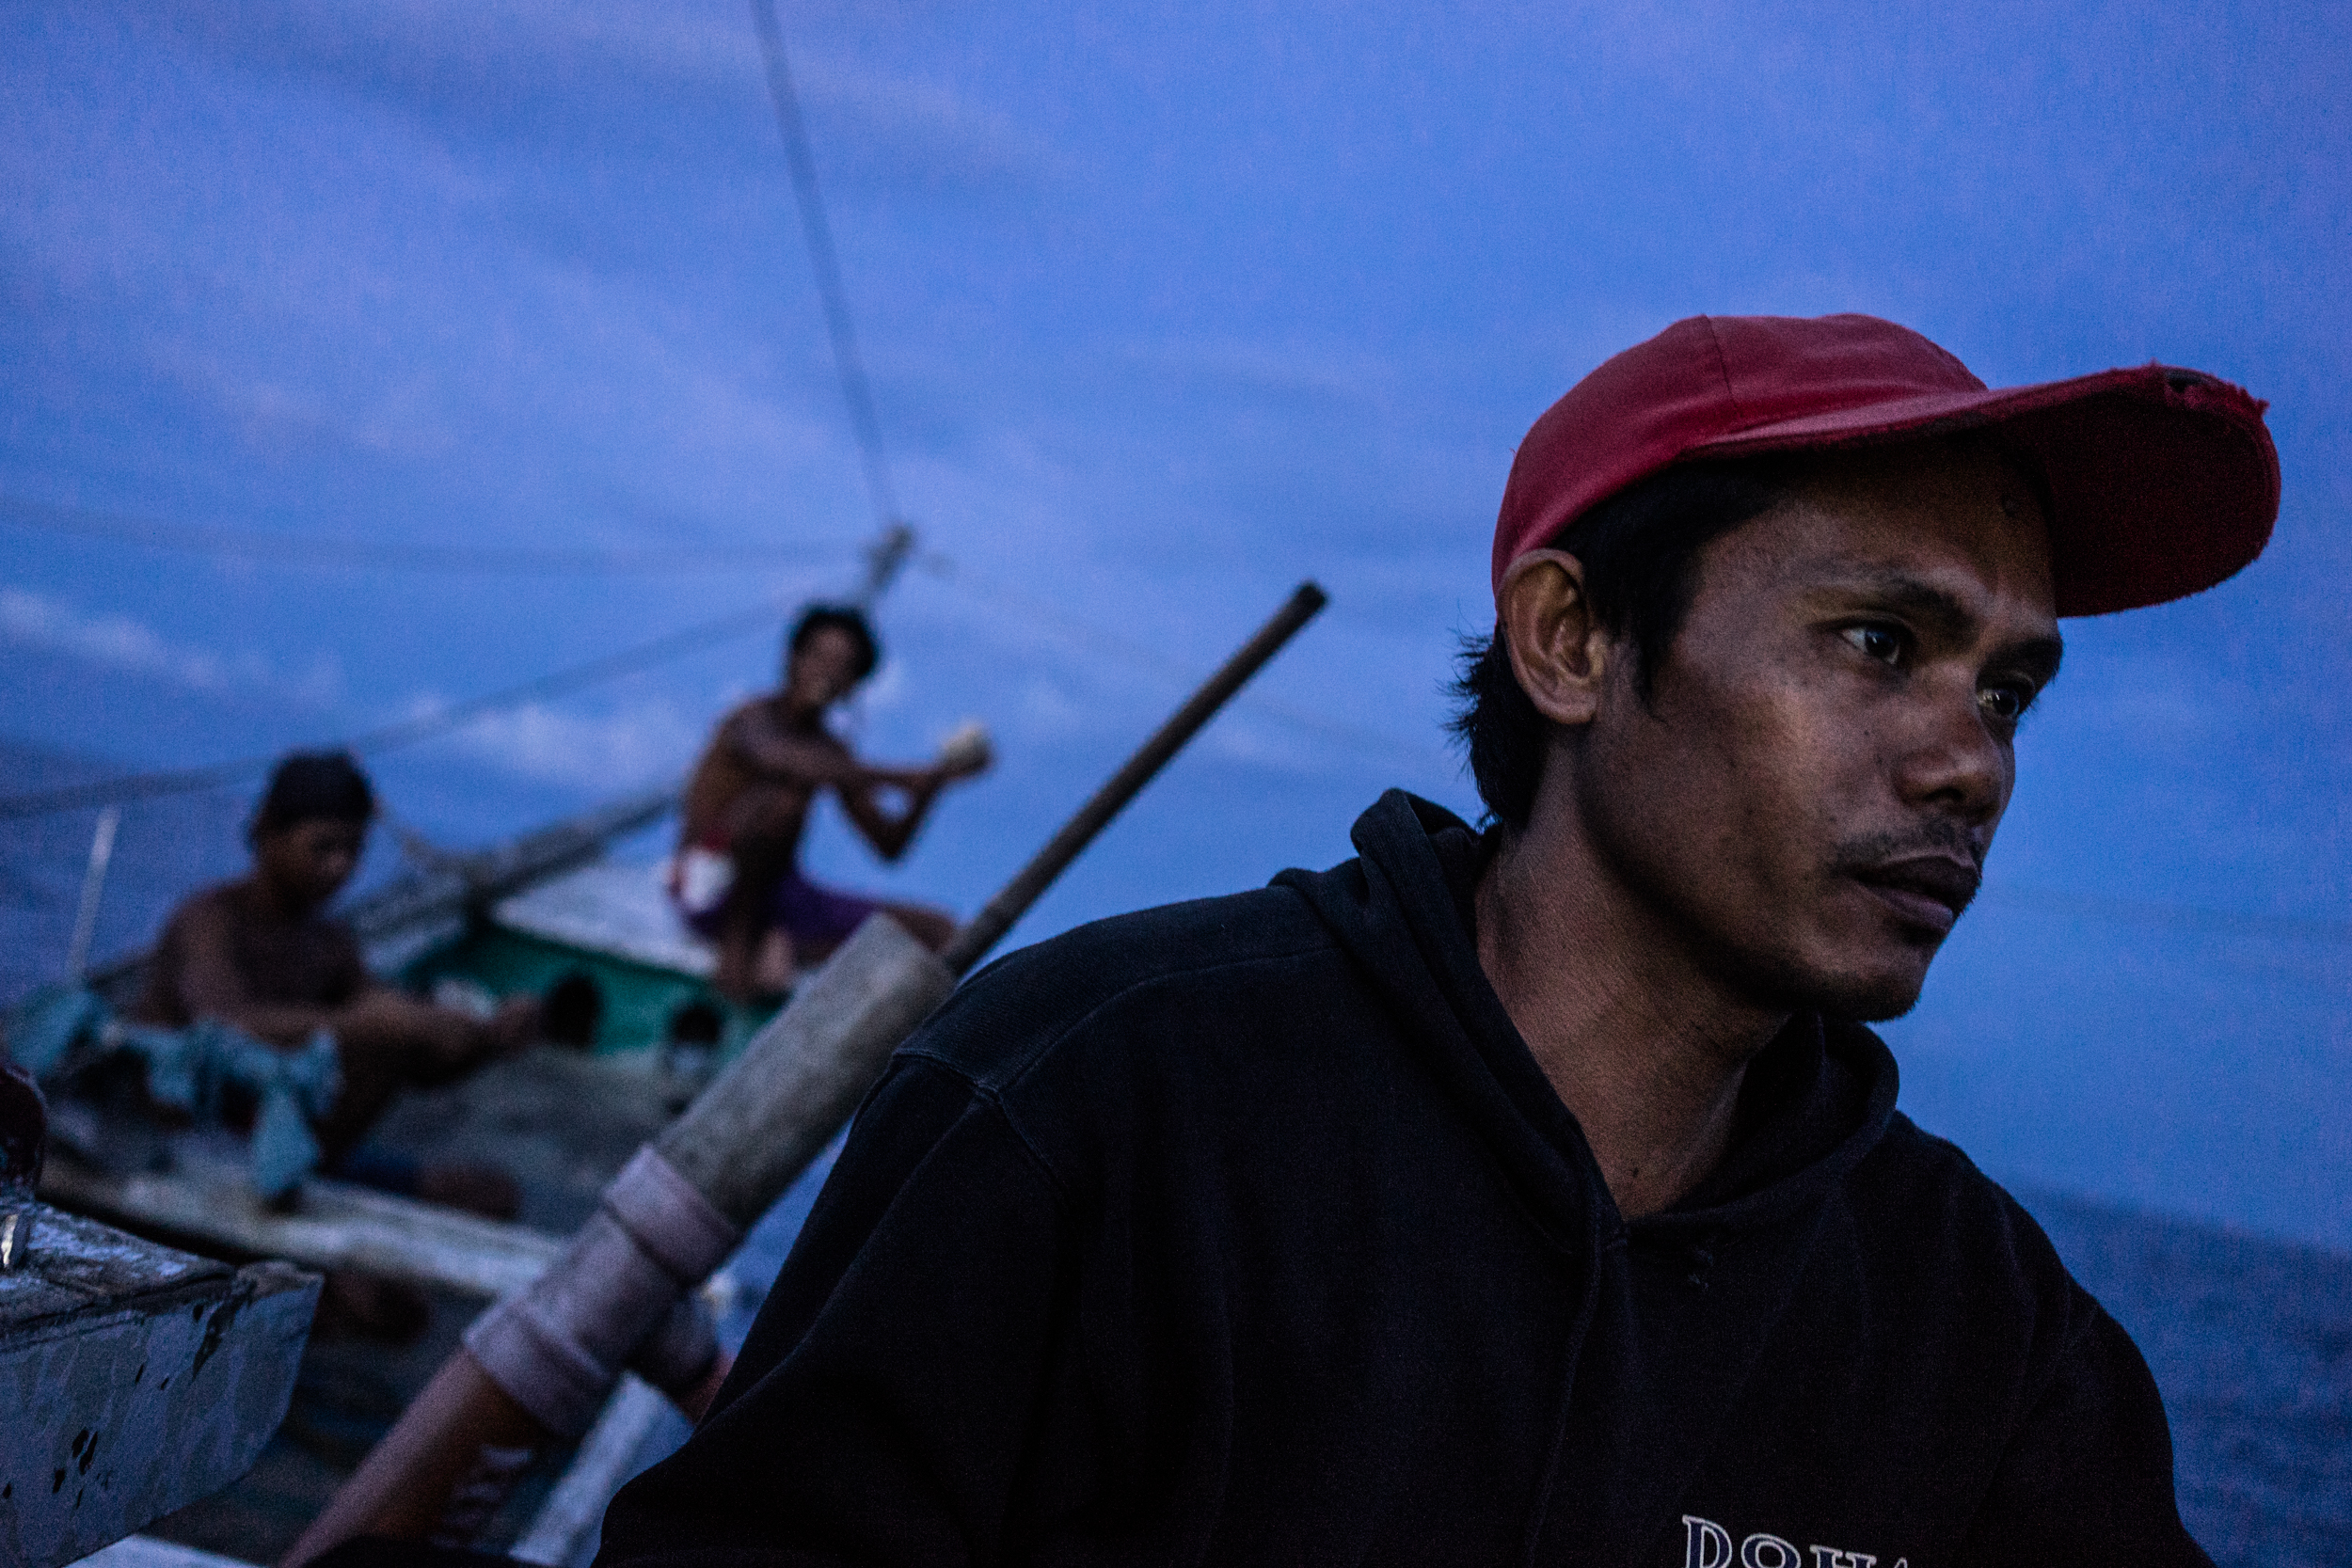  Kalibo, Philippines - September 21, 2015: Conrad Banihit is seen in a local fishing boat in Kalibo, Philippines. Because of the low wage he earns, Conrad decided to go aboard a Taiwanese fishing vessel, to which he was illegally recruited, then abus